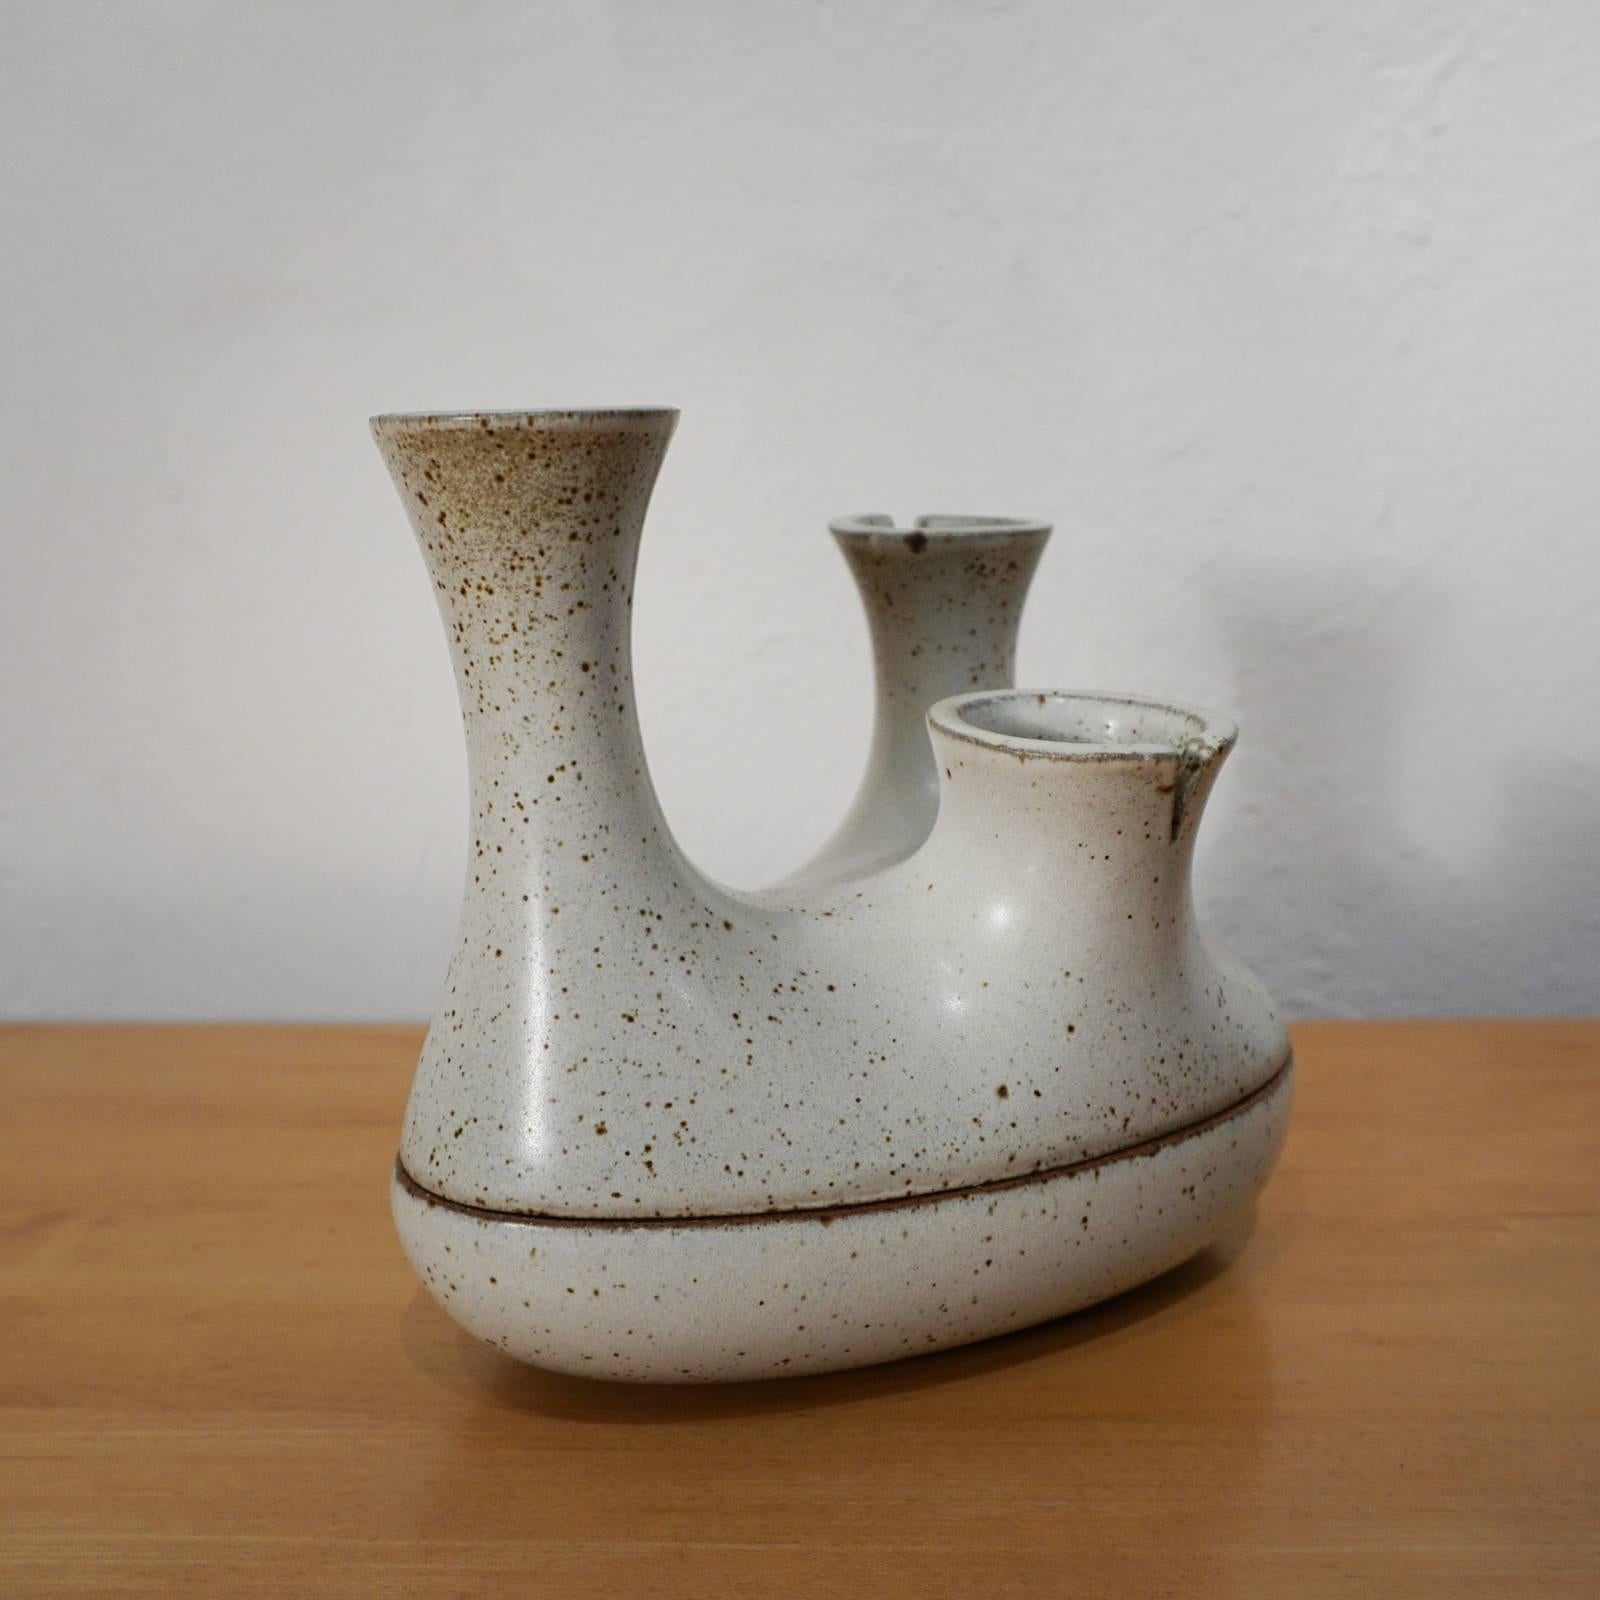 Uncommon two-piece sculptural form from David Cressey's Pro/Artisan line for Architectural Pottery. The form was designed by Douglas Deeds. 

From the Architectural Pottery Pro/Artisan catalog:
